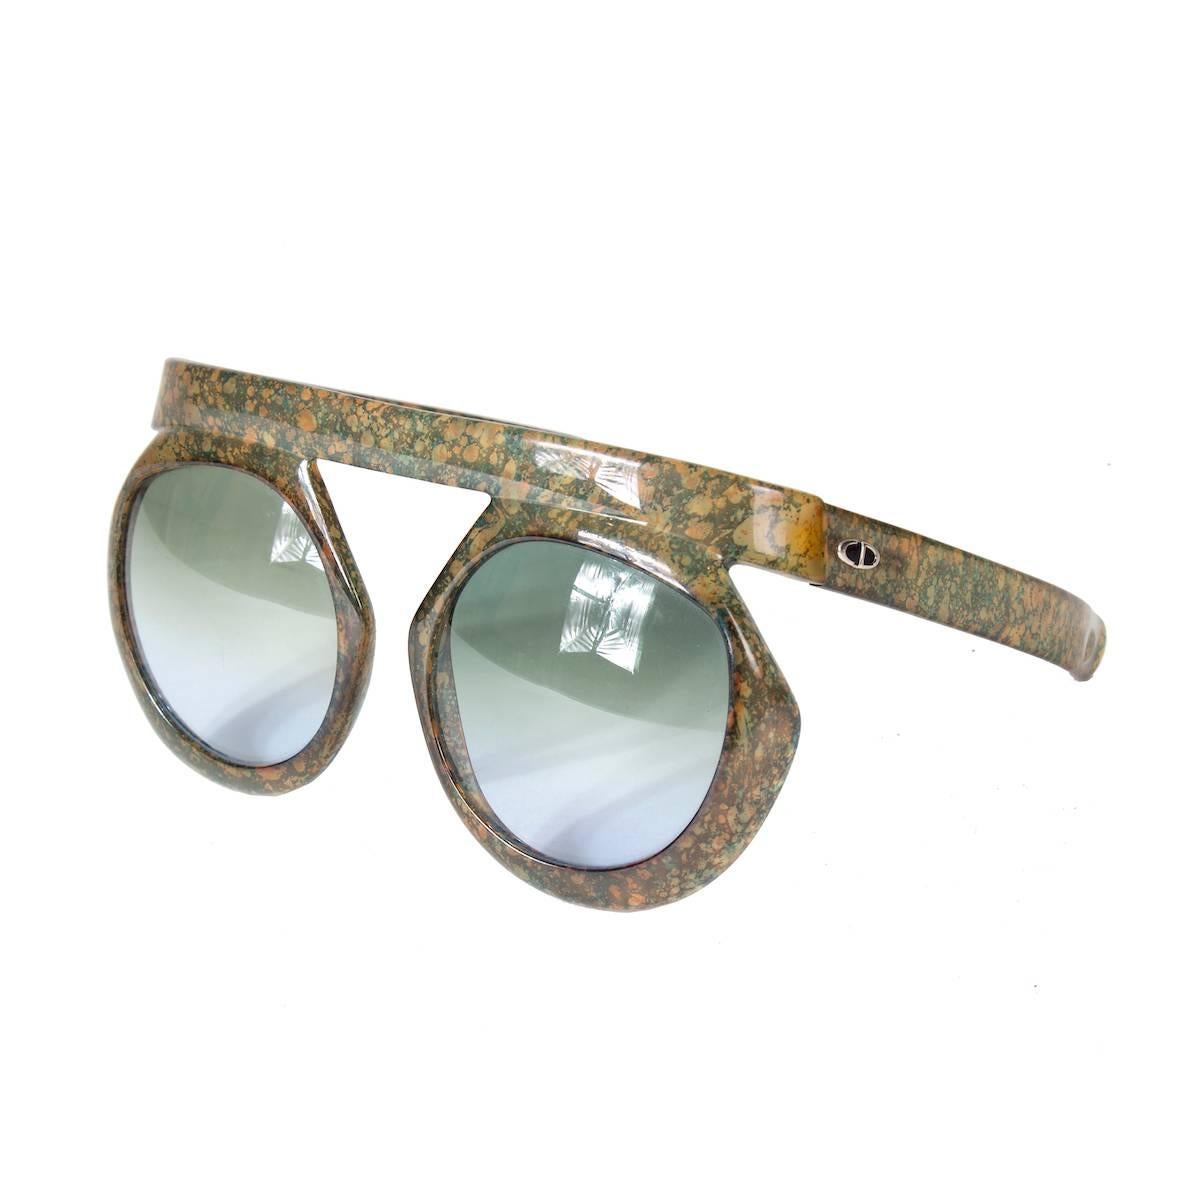 Christian Dior Vintage 2030 Sunglasses from the 1970s